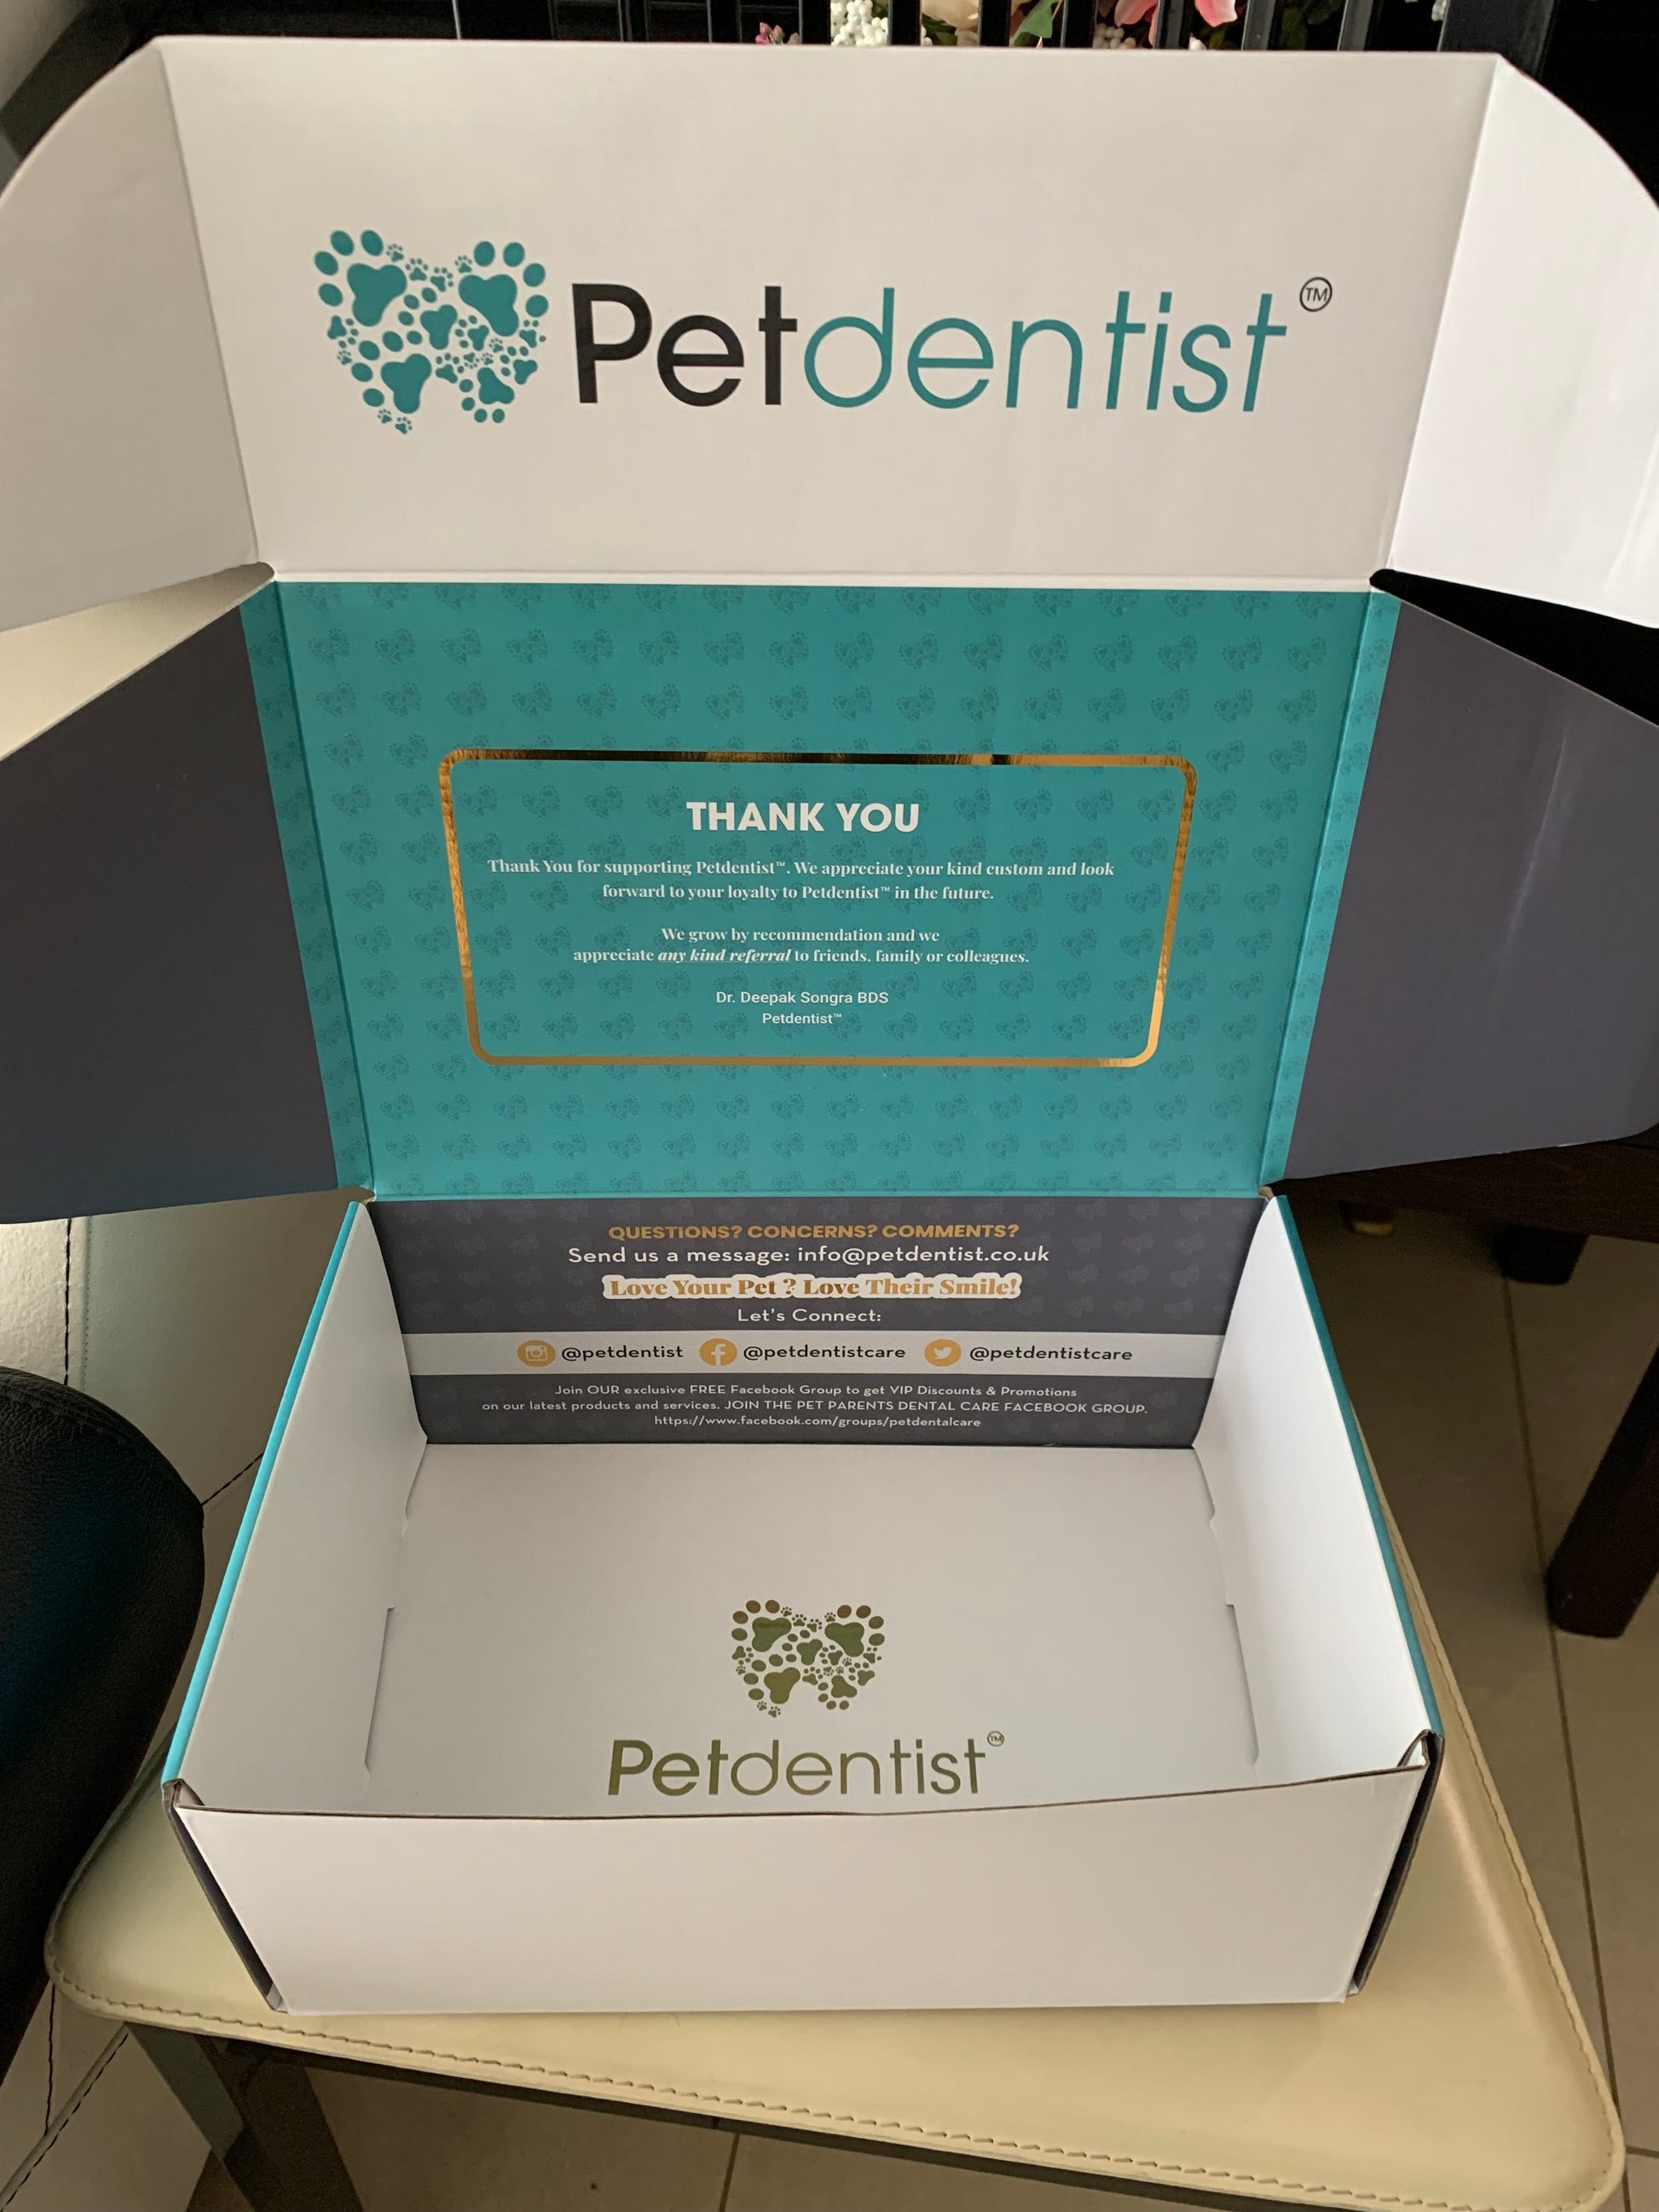 Petdentist® Pet Oral Care Supplies Petdentist®-VIP Ultimate ALL-IN-ONE Teeth Cleaning Kit Hamper Gift Set Box For PREMIUM Dog Dental Care